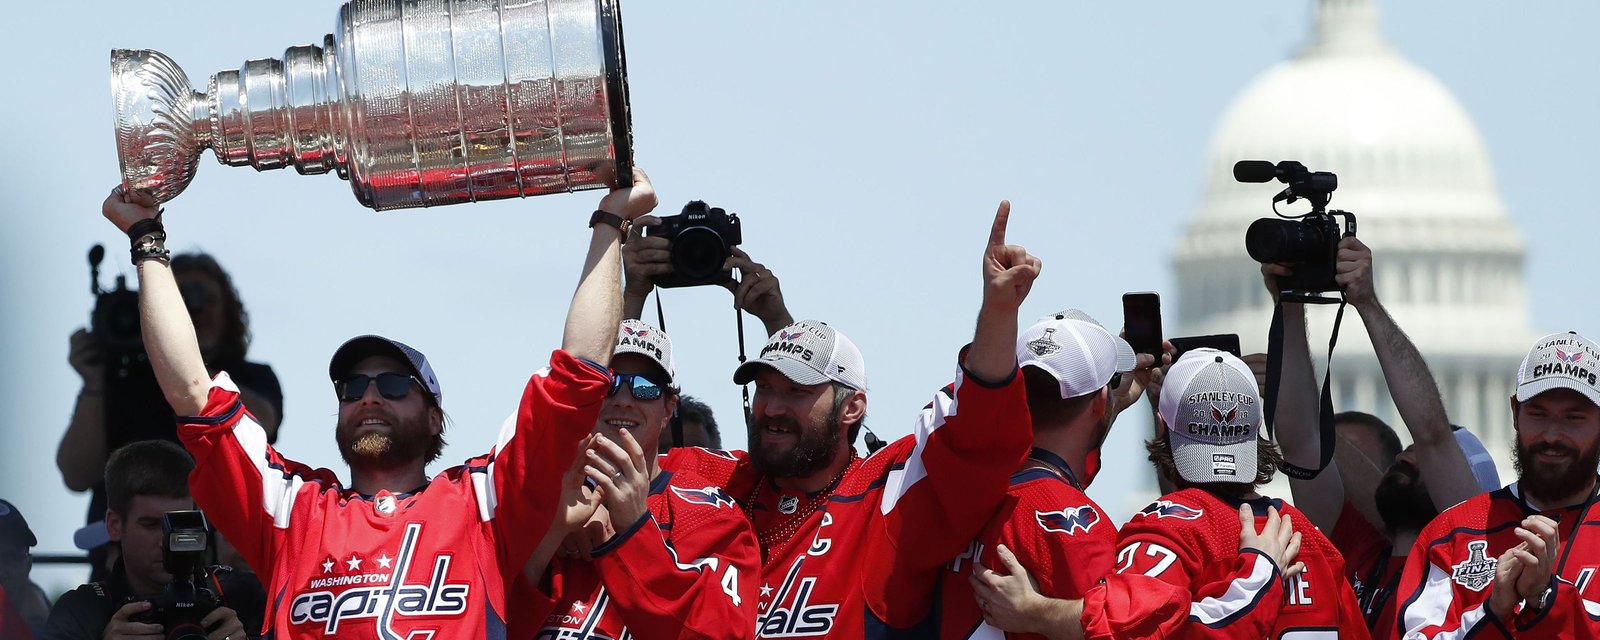 Trump refuses to have reporters present at Capitals’ Stanley Cup visit?! 